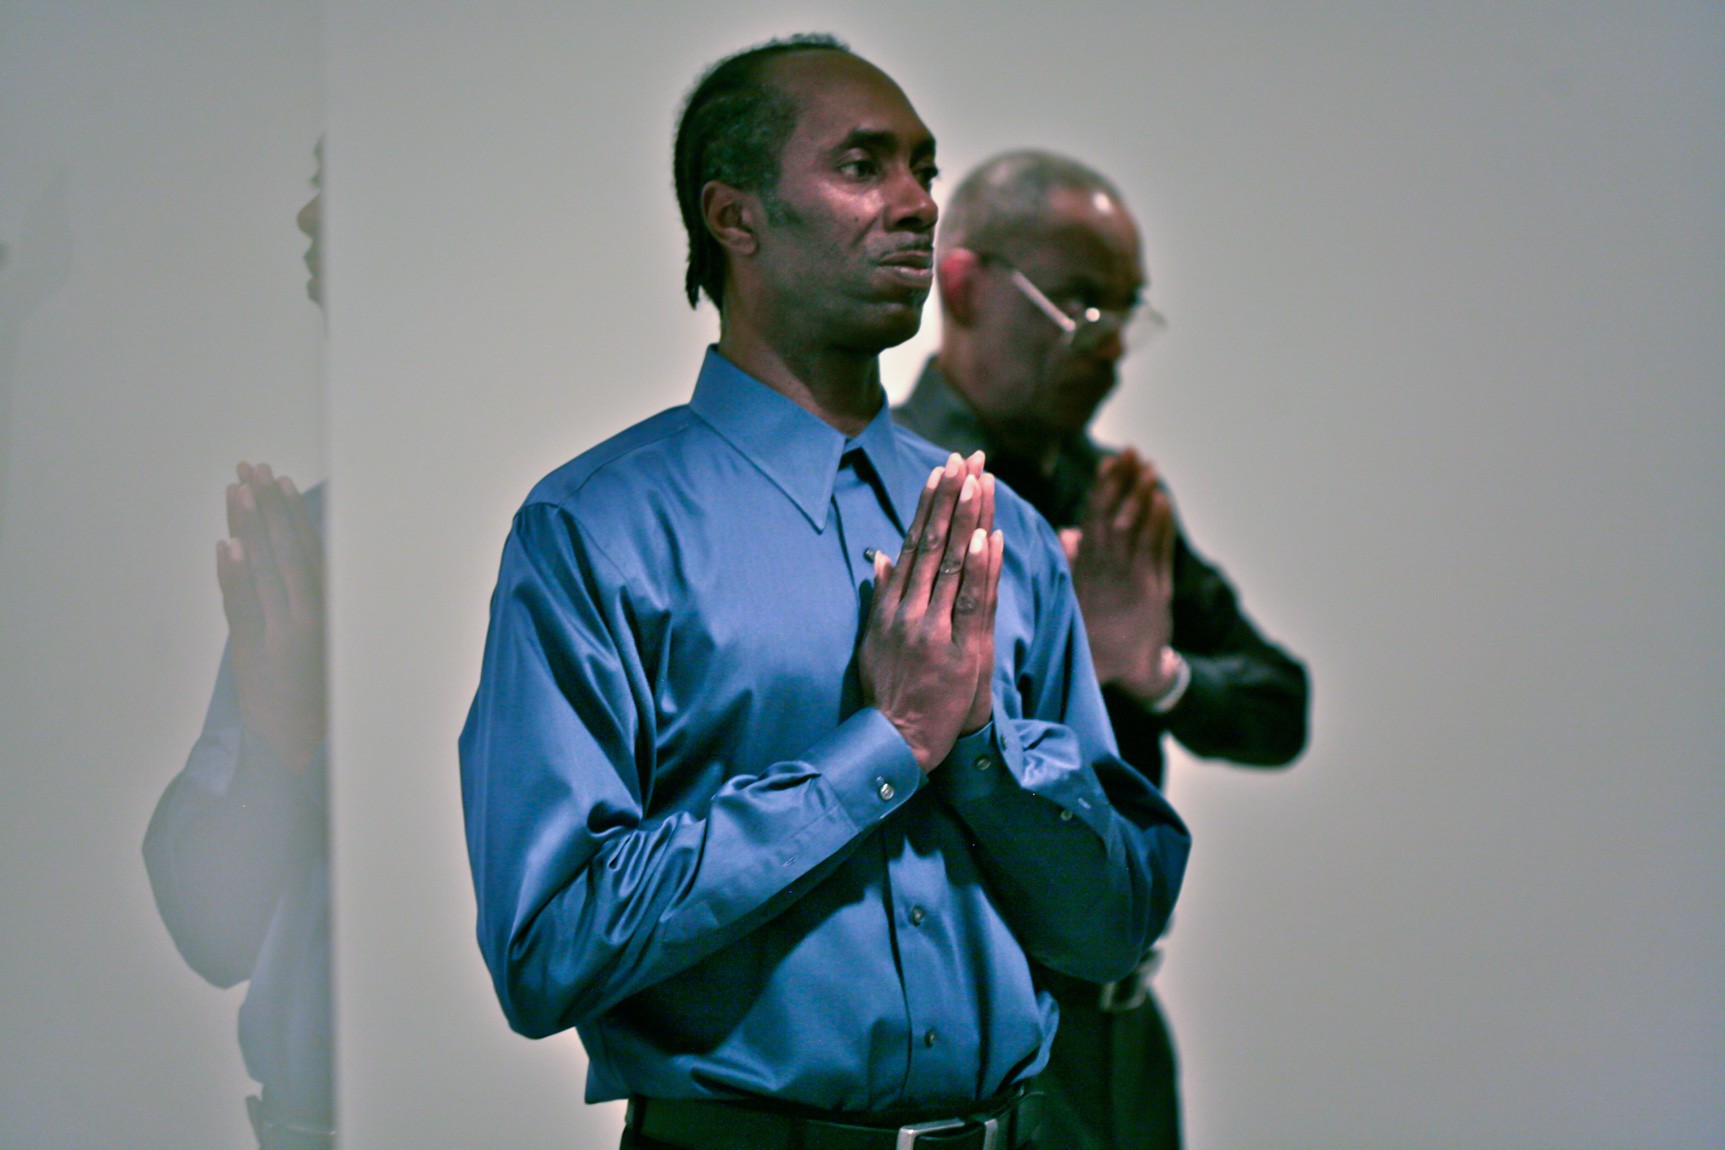 Two participants hold their hands in a praying pose.